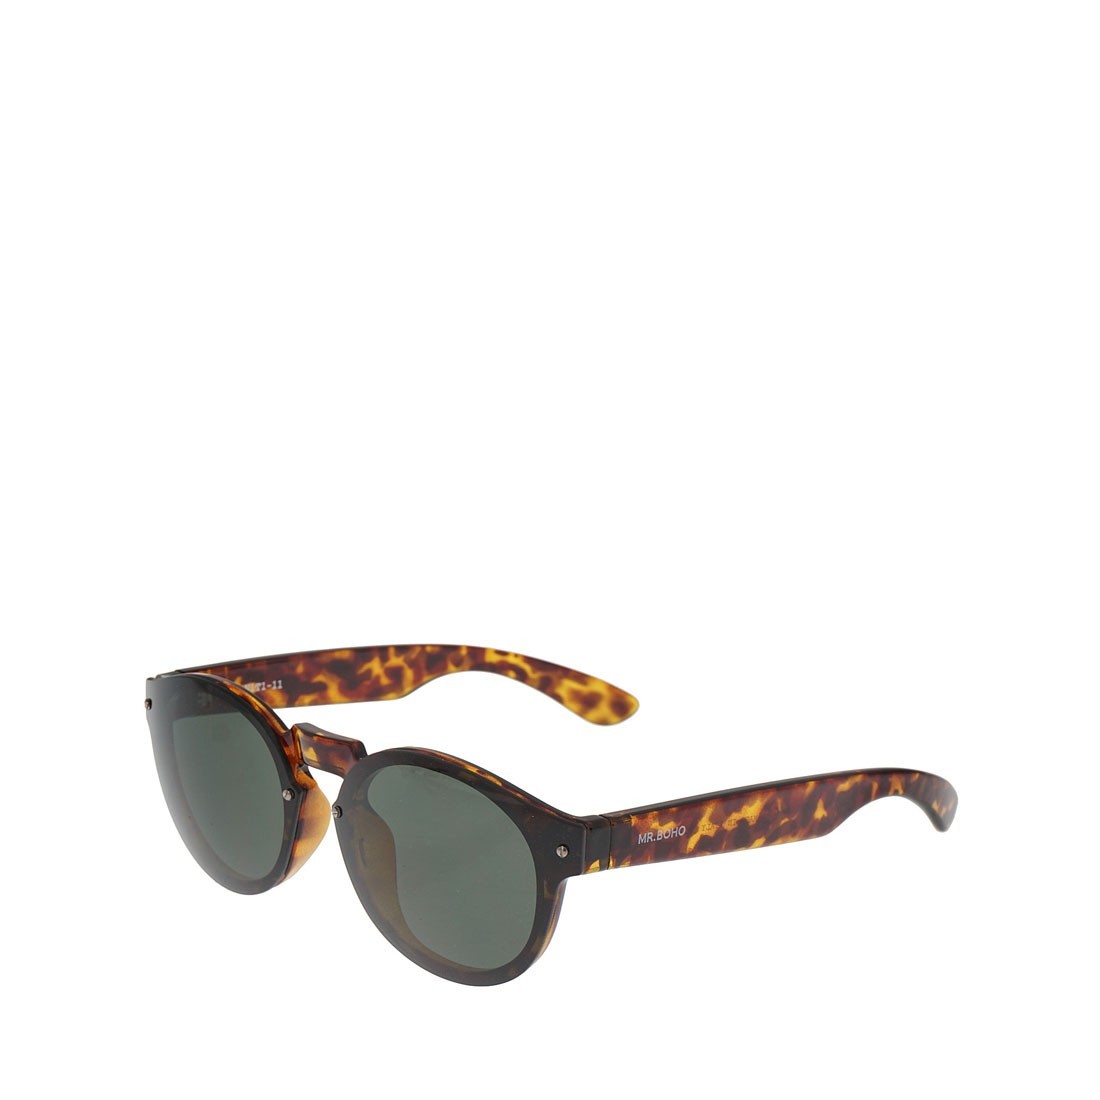 Buy Mr. Boho Sunglasses Classic Jordaan Screen Polarized - Mr. Boho,  delivered to your home | The Outfit